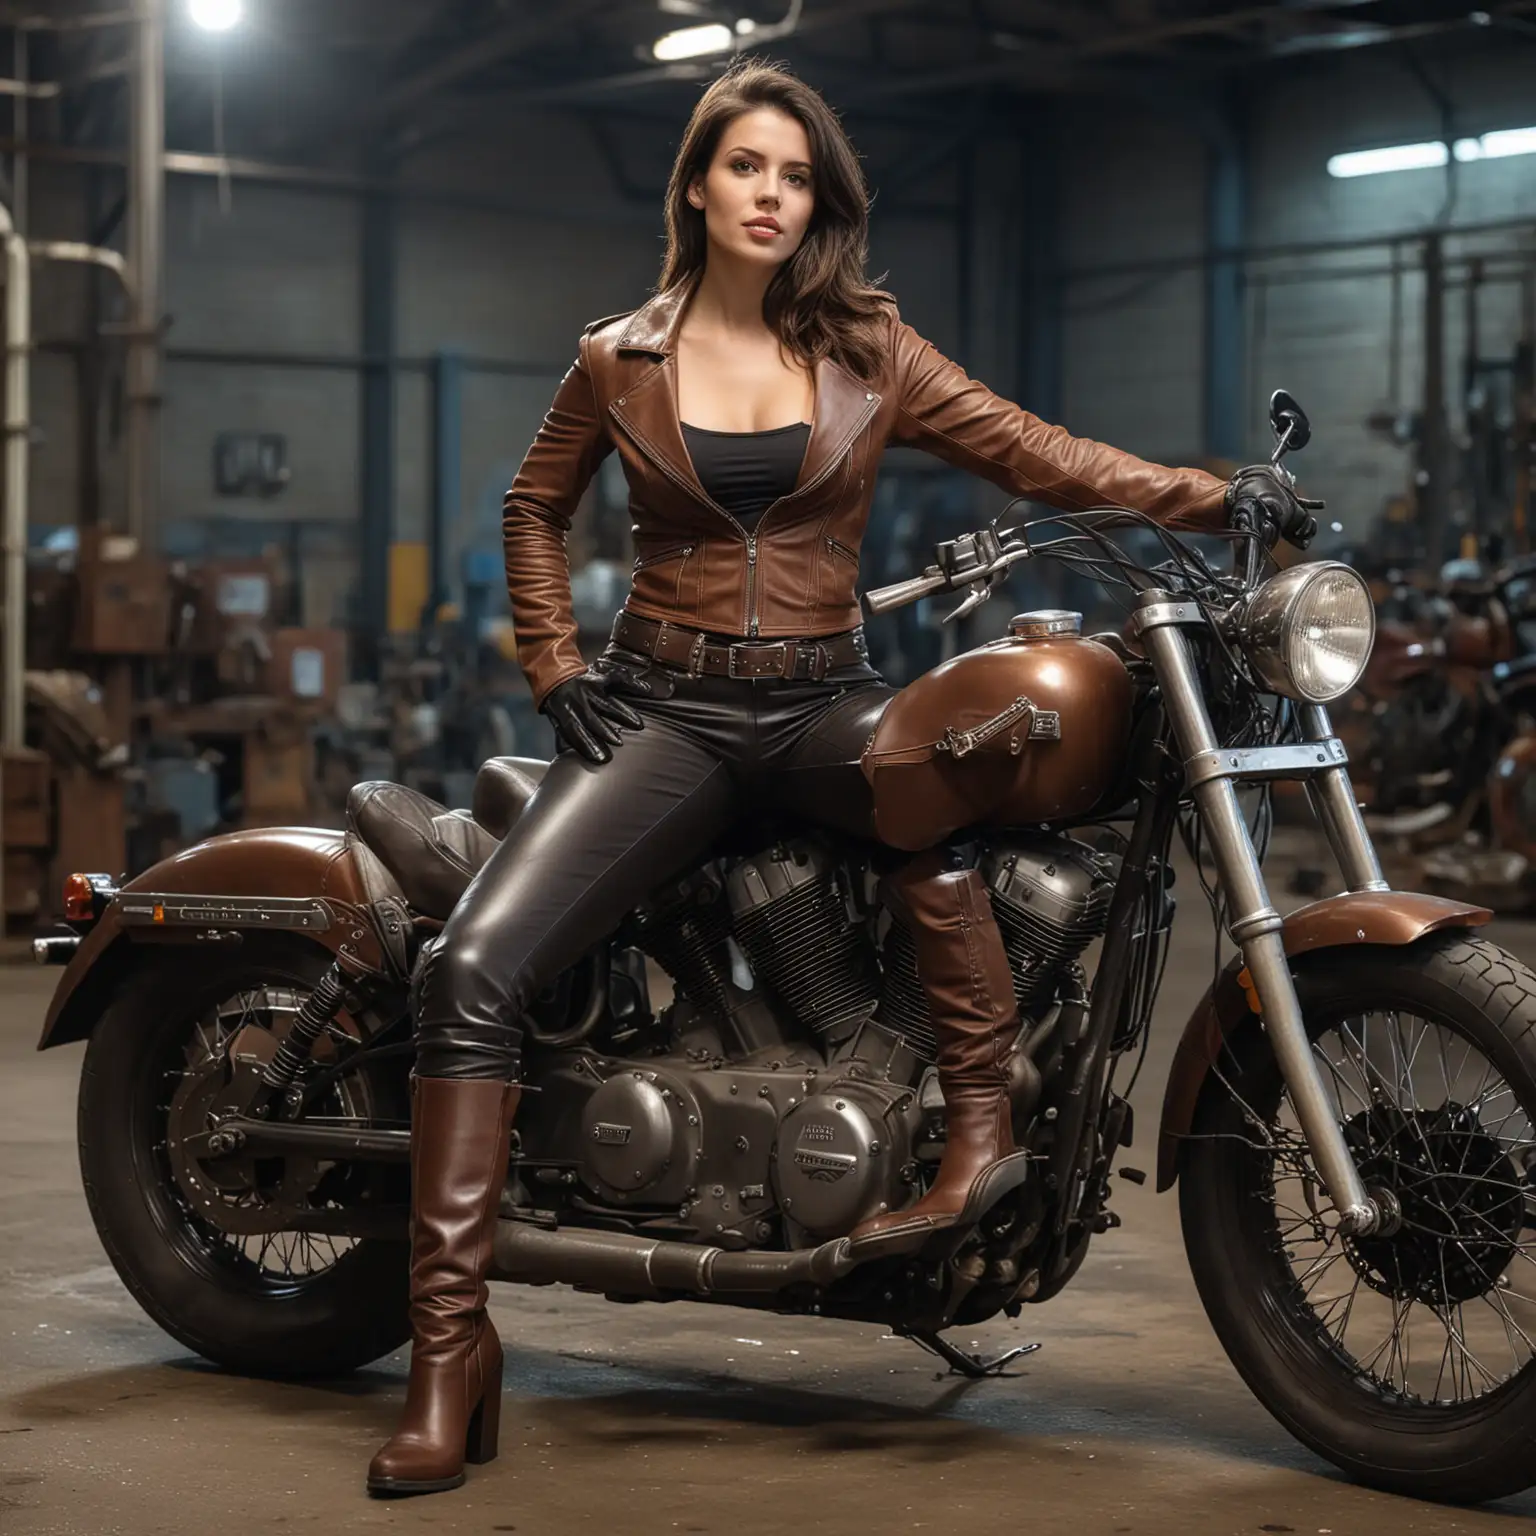 Confident Brunette Woman Poses on Harley Motorbike in Industrial Setting at Night